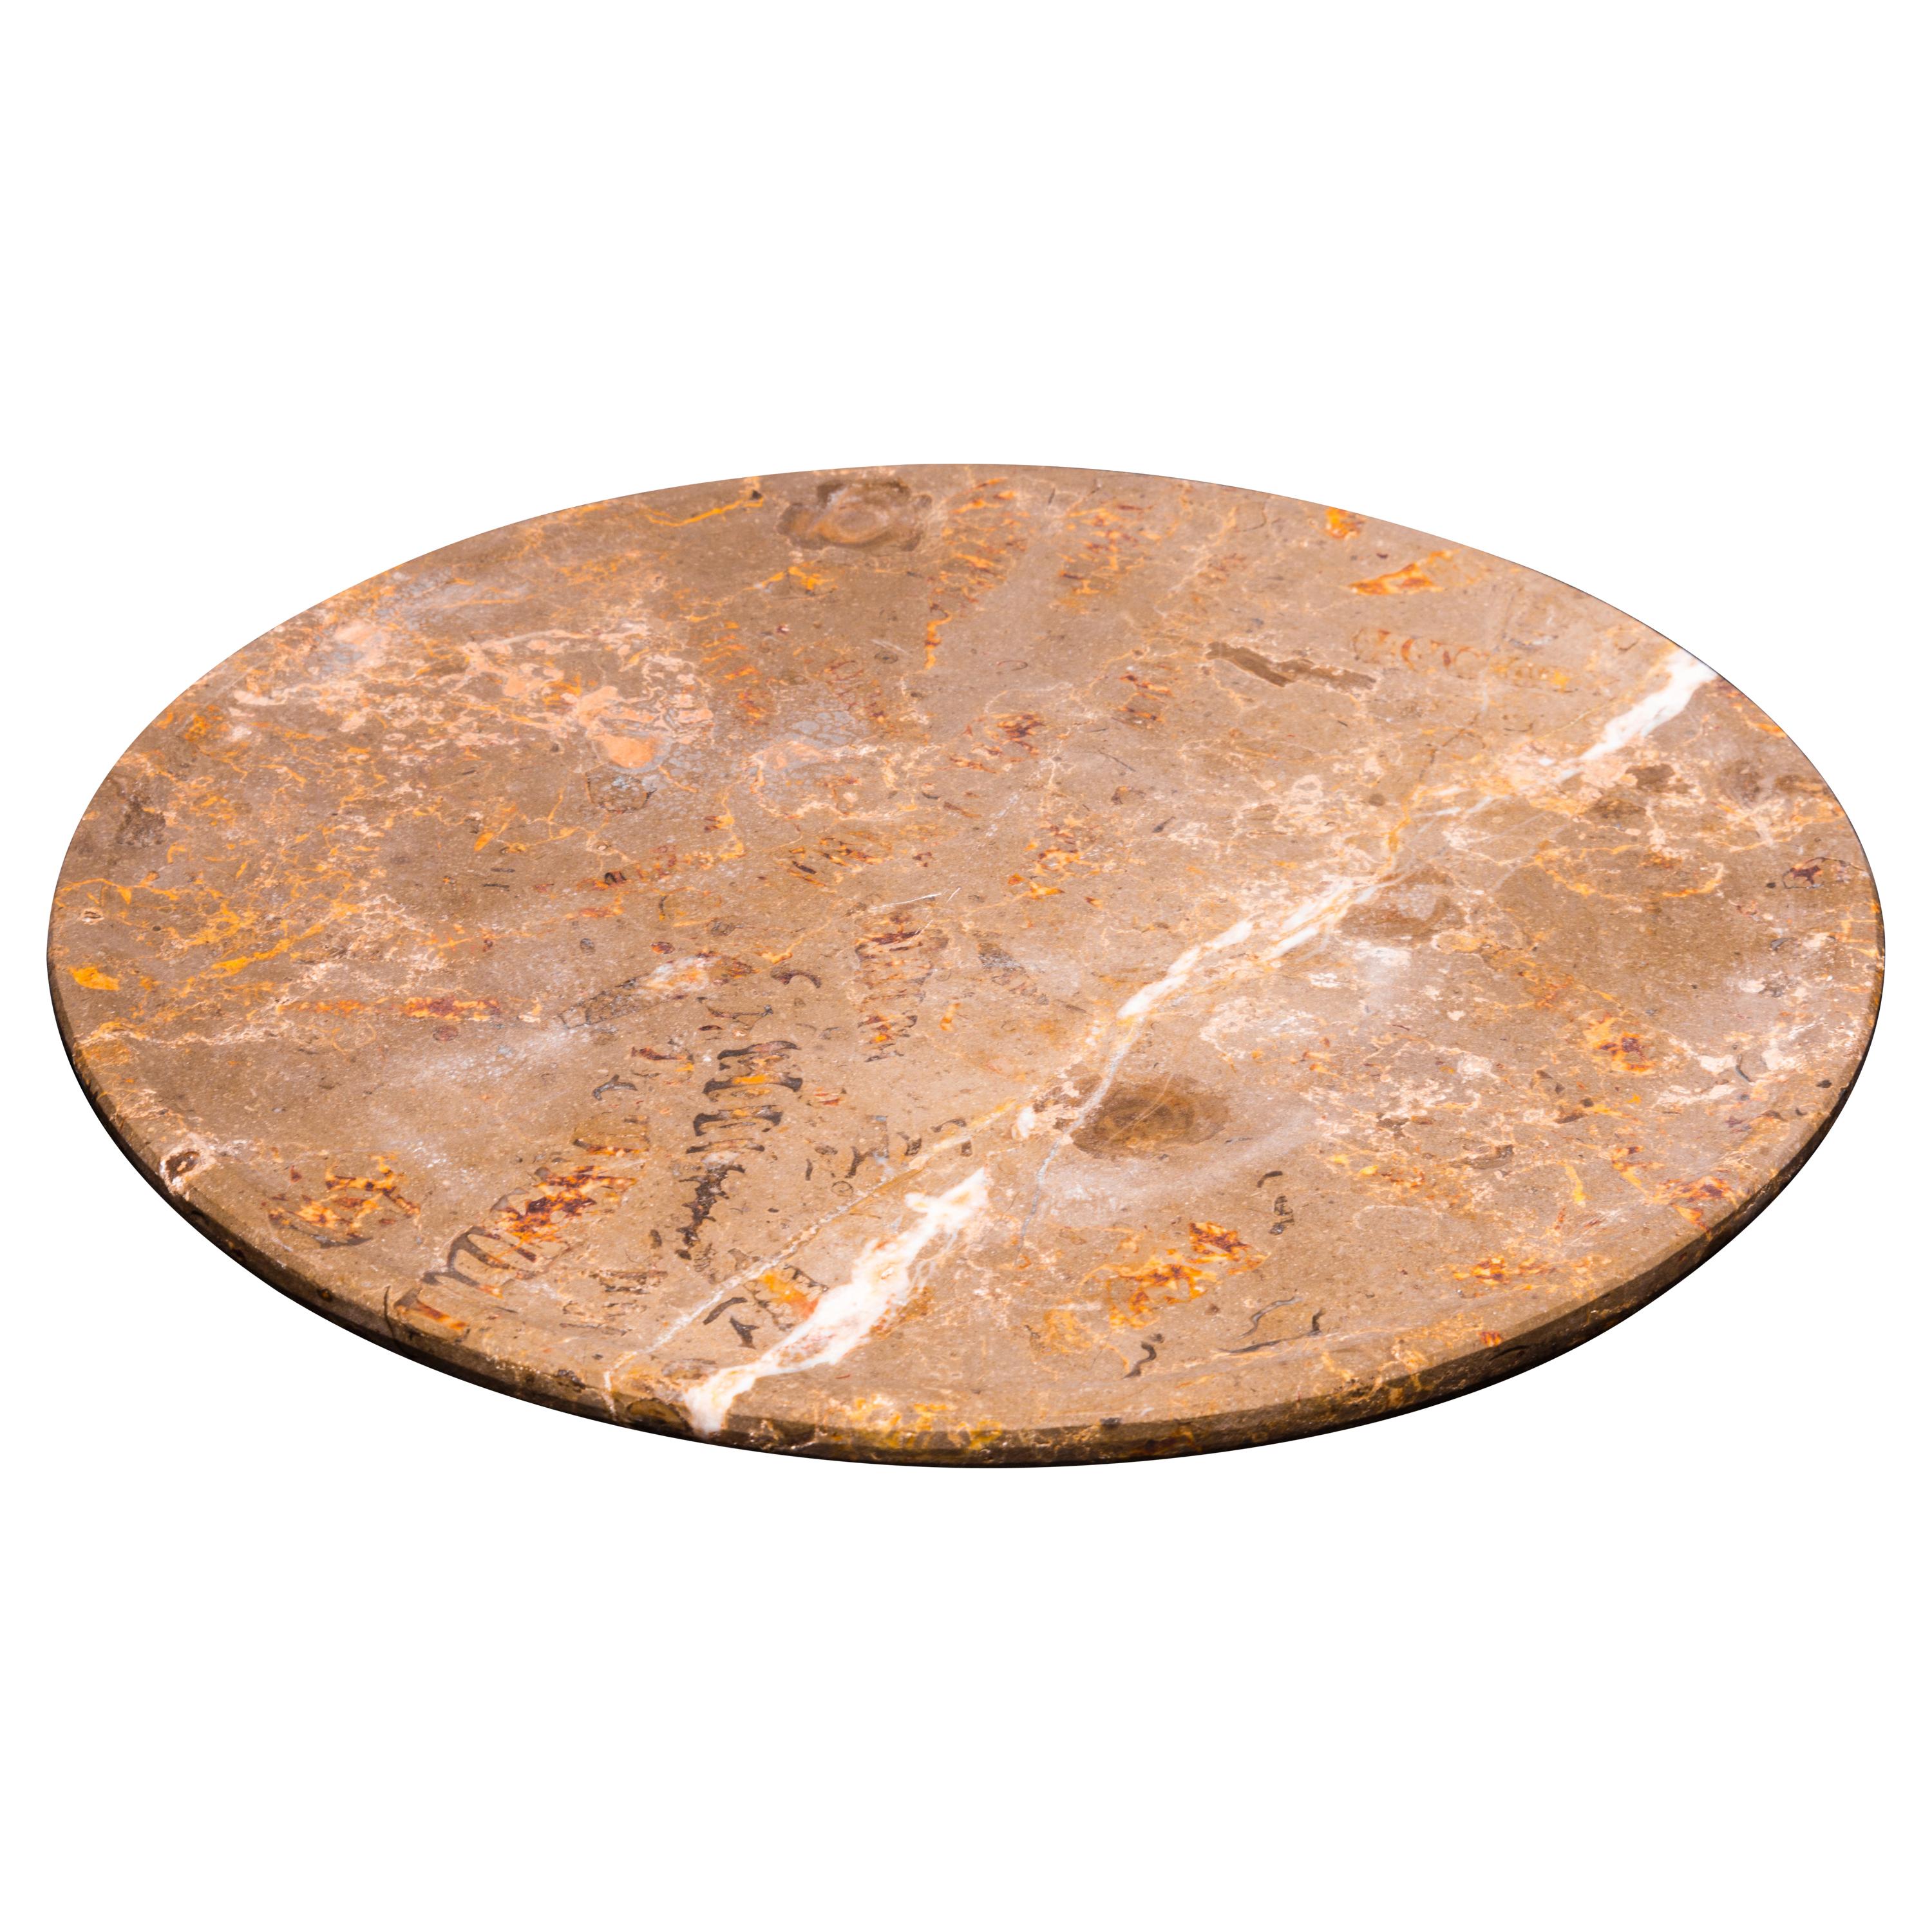 Aina Contemporary Jurassic Fossil Marble Insulam Plate, Living Collection For Sale